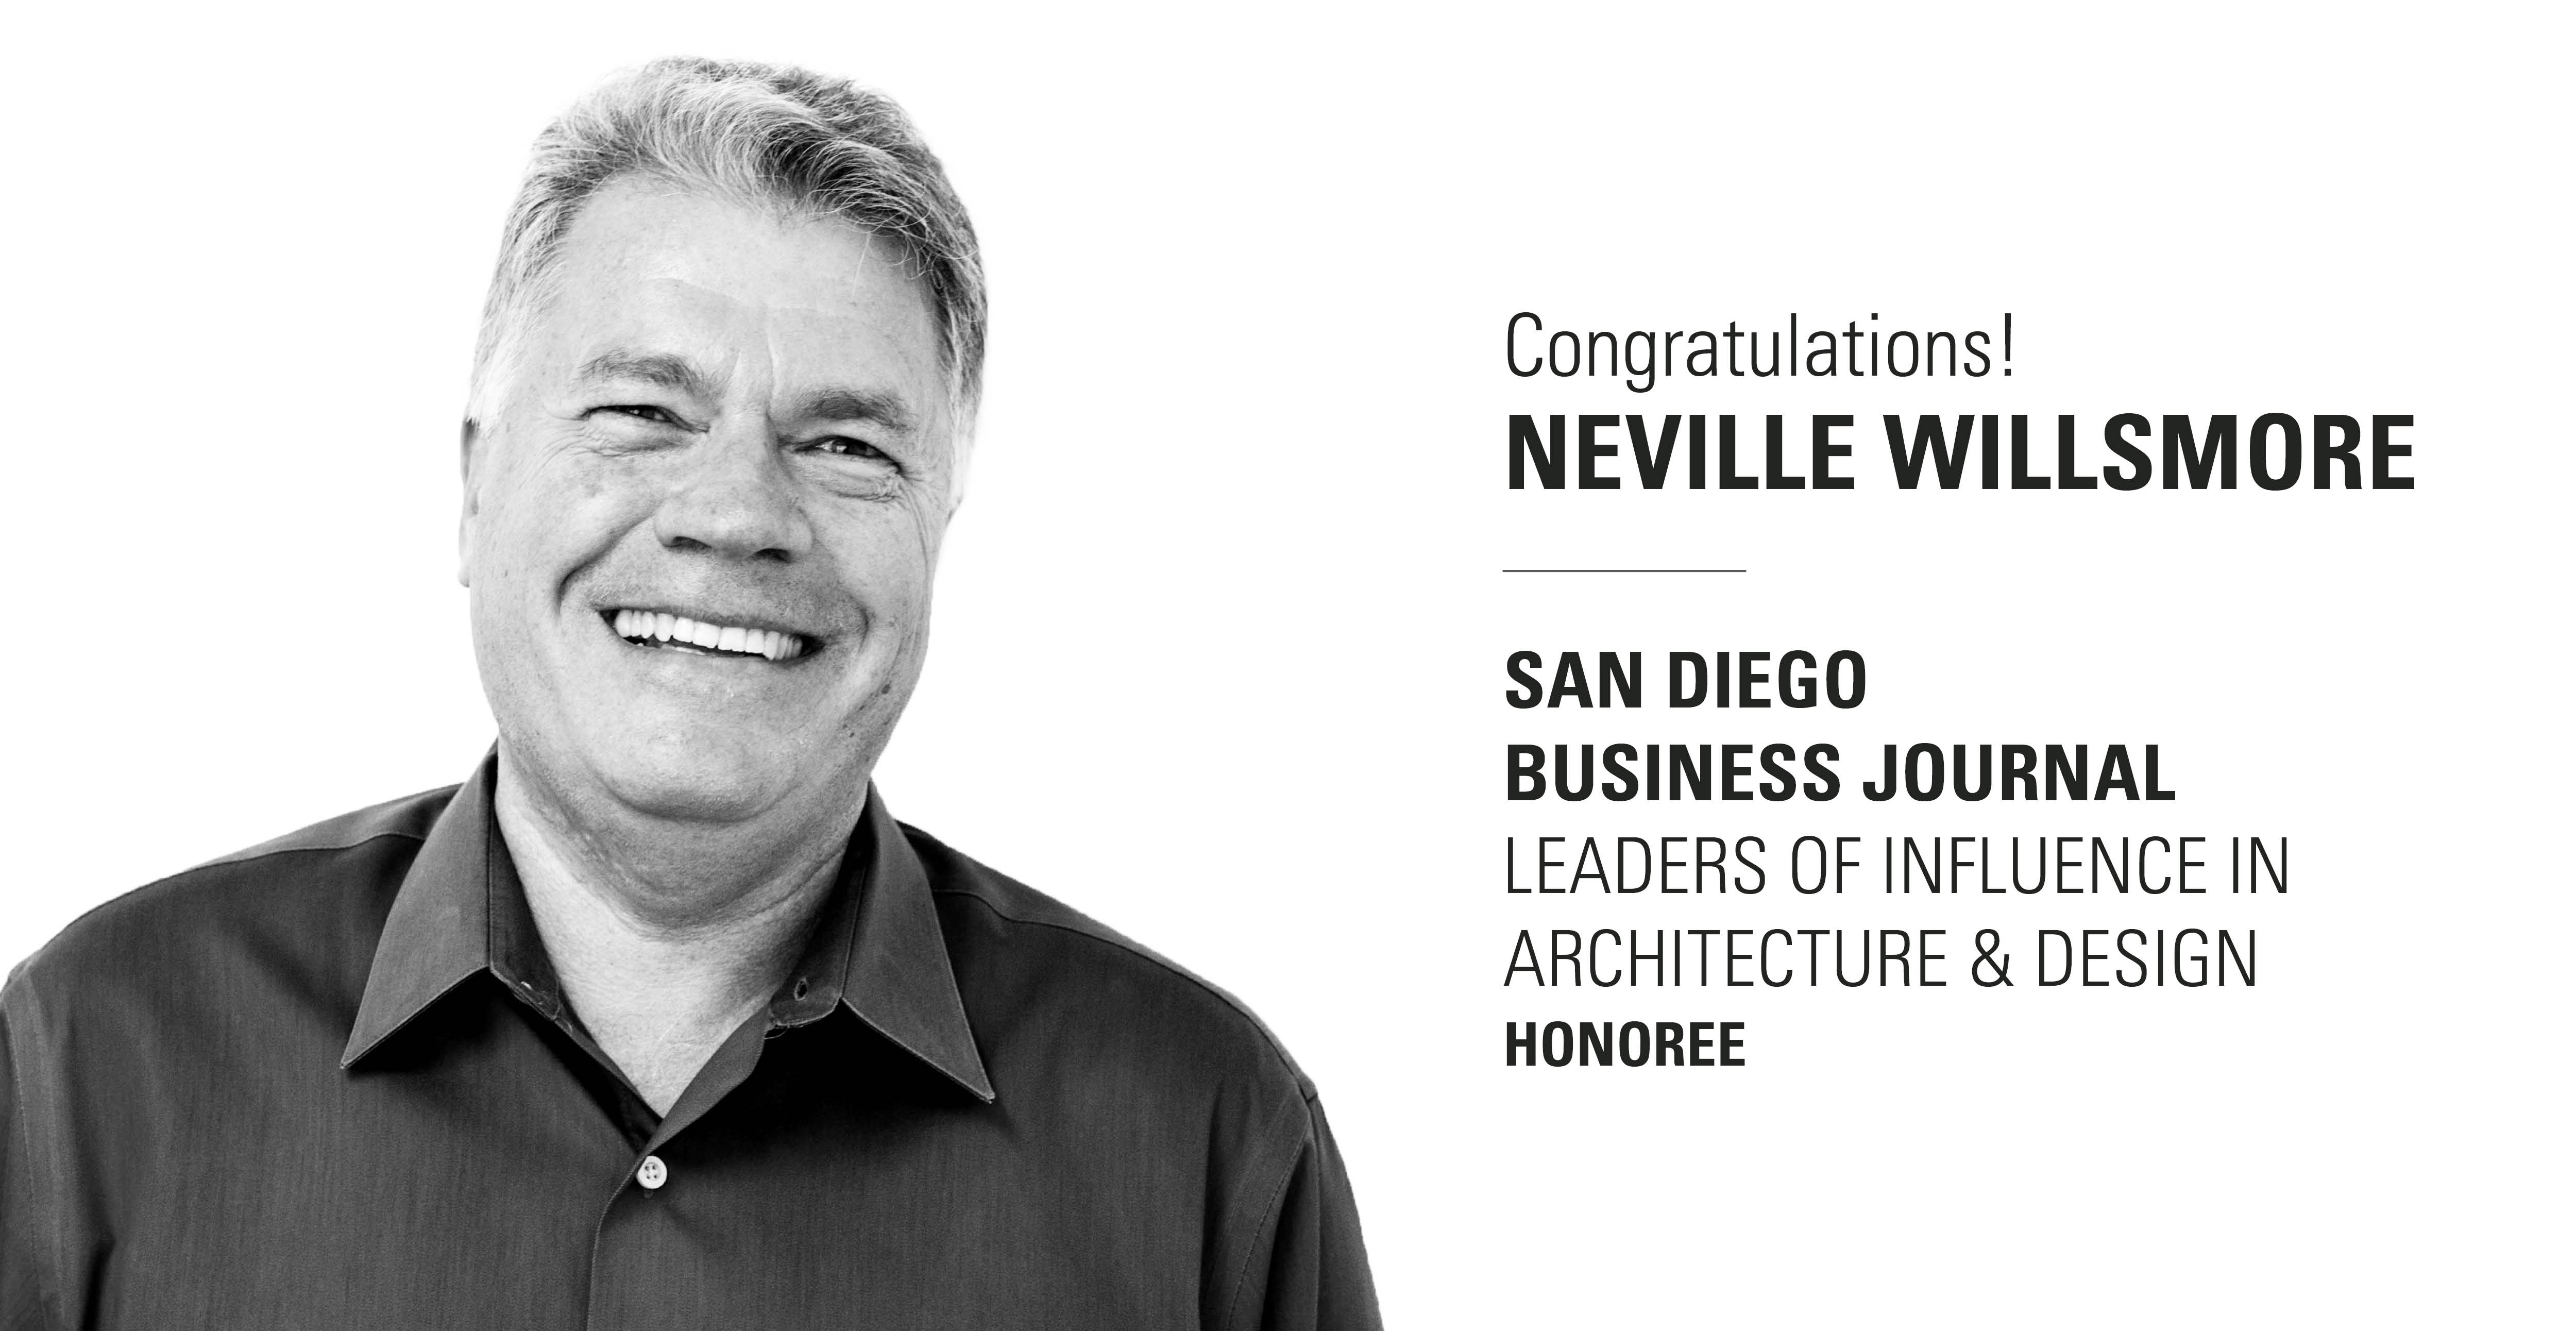 /Photo%20of%20Neville%20Willsmore%2C%20with%20text%3A%20Congratulations%20Neville%20Willsmore%2C%20San%20Diego%20Business%20Journal%20Leader%20of%20Influence%20in%20Architecture%20and%20Design%2C%20Honoree